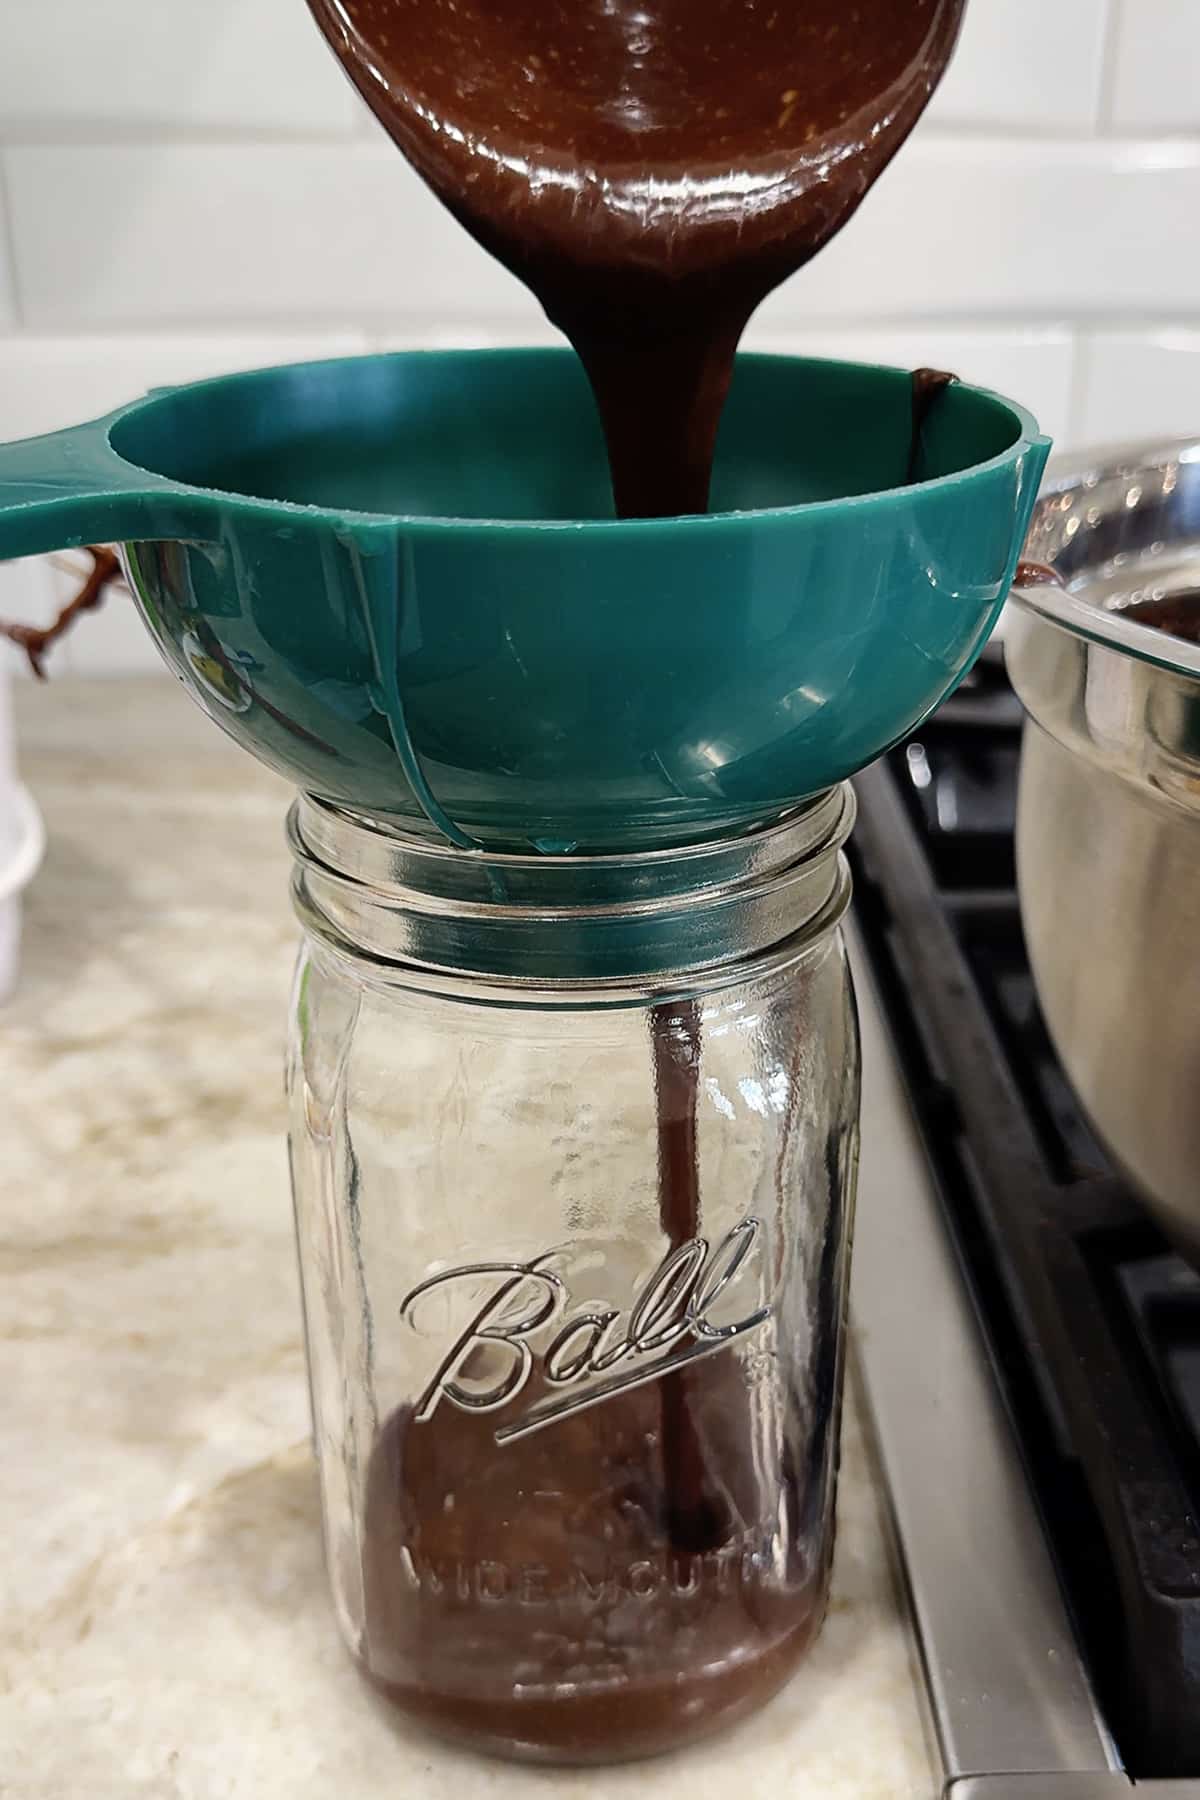 transferring chocolate sauce into a ball canning jar using a green funnel